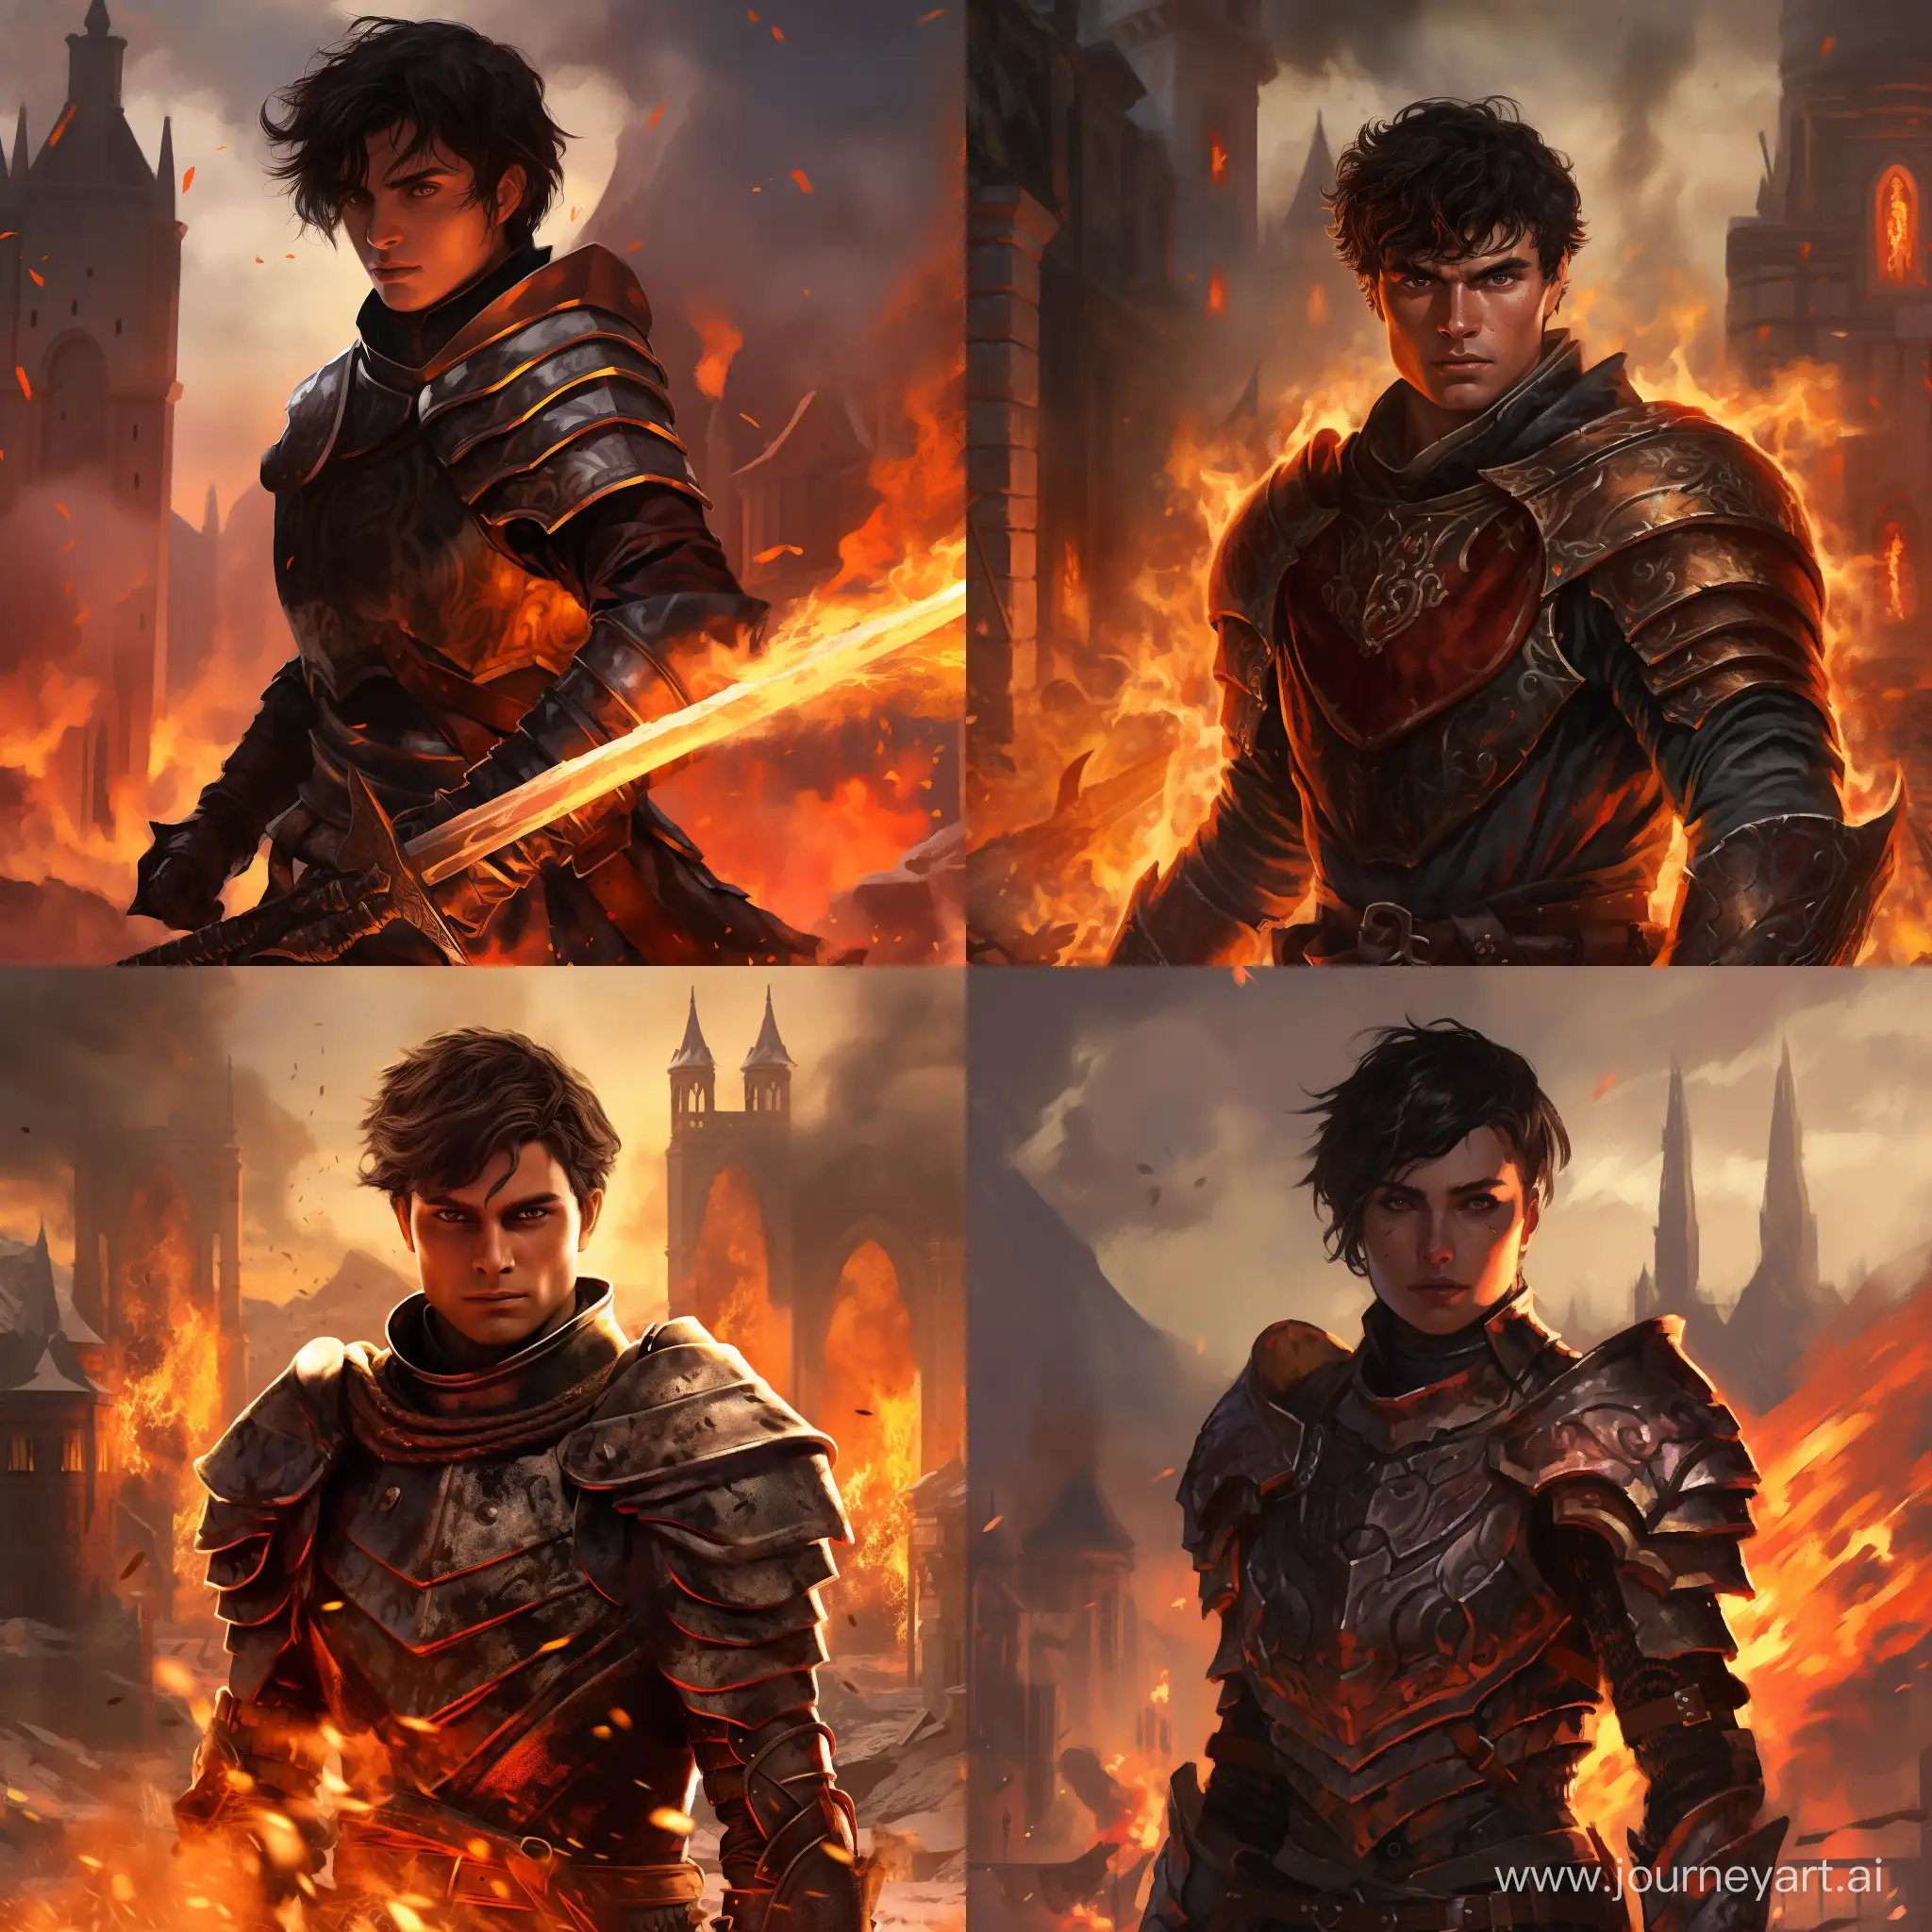 Angry-Young-Paladin-in-Heavy-Armor-with-Hammer-Amidst-a-Burning-Village